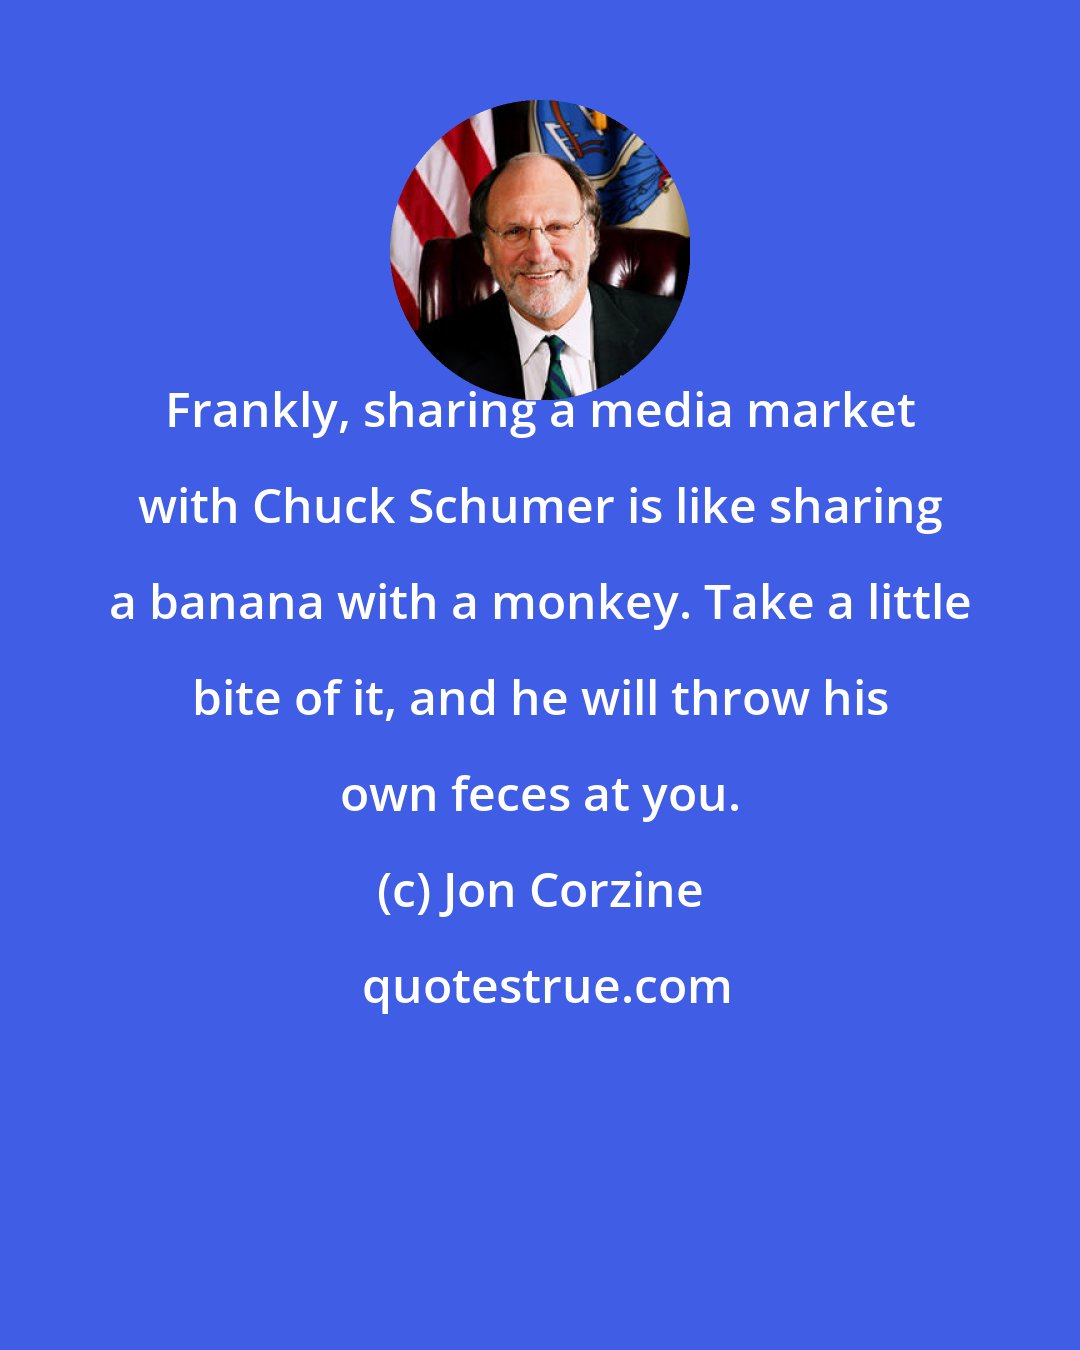 Jon Corzine: Frankly, sharing a media market with Chuck Schumer is like sharing a banana with a monkey. Take a little bite of it, and he will throw his own feces at you.